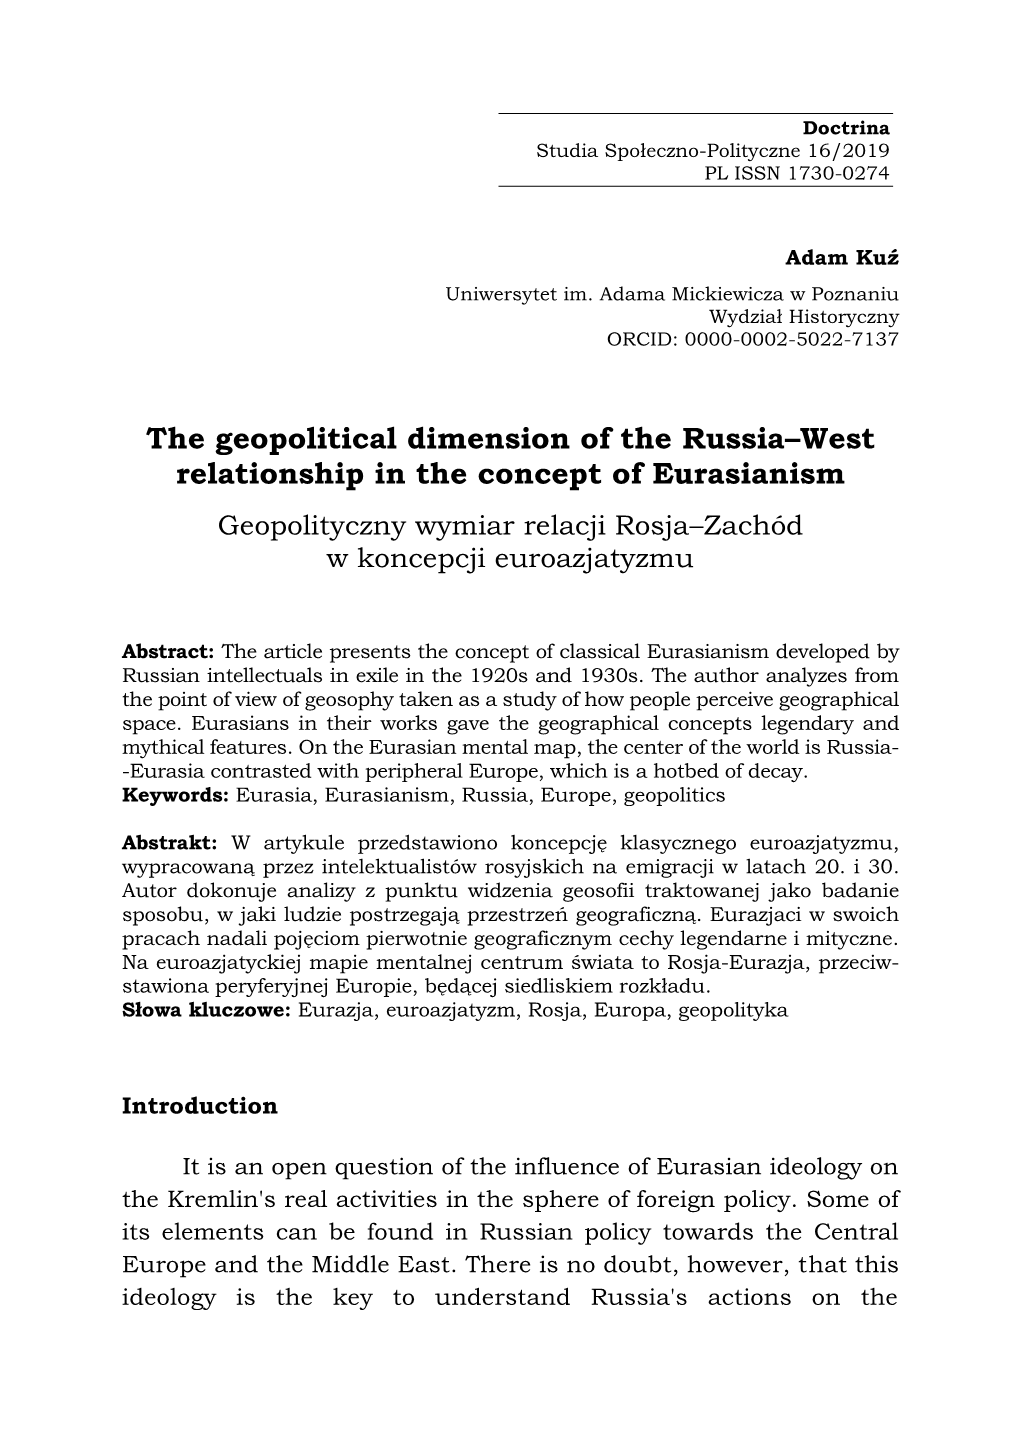 The Geopolitical Dimension of the Russia–West Relationship in the Concept of Eurasianism